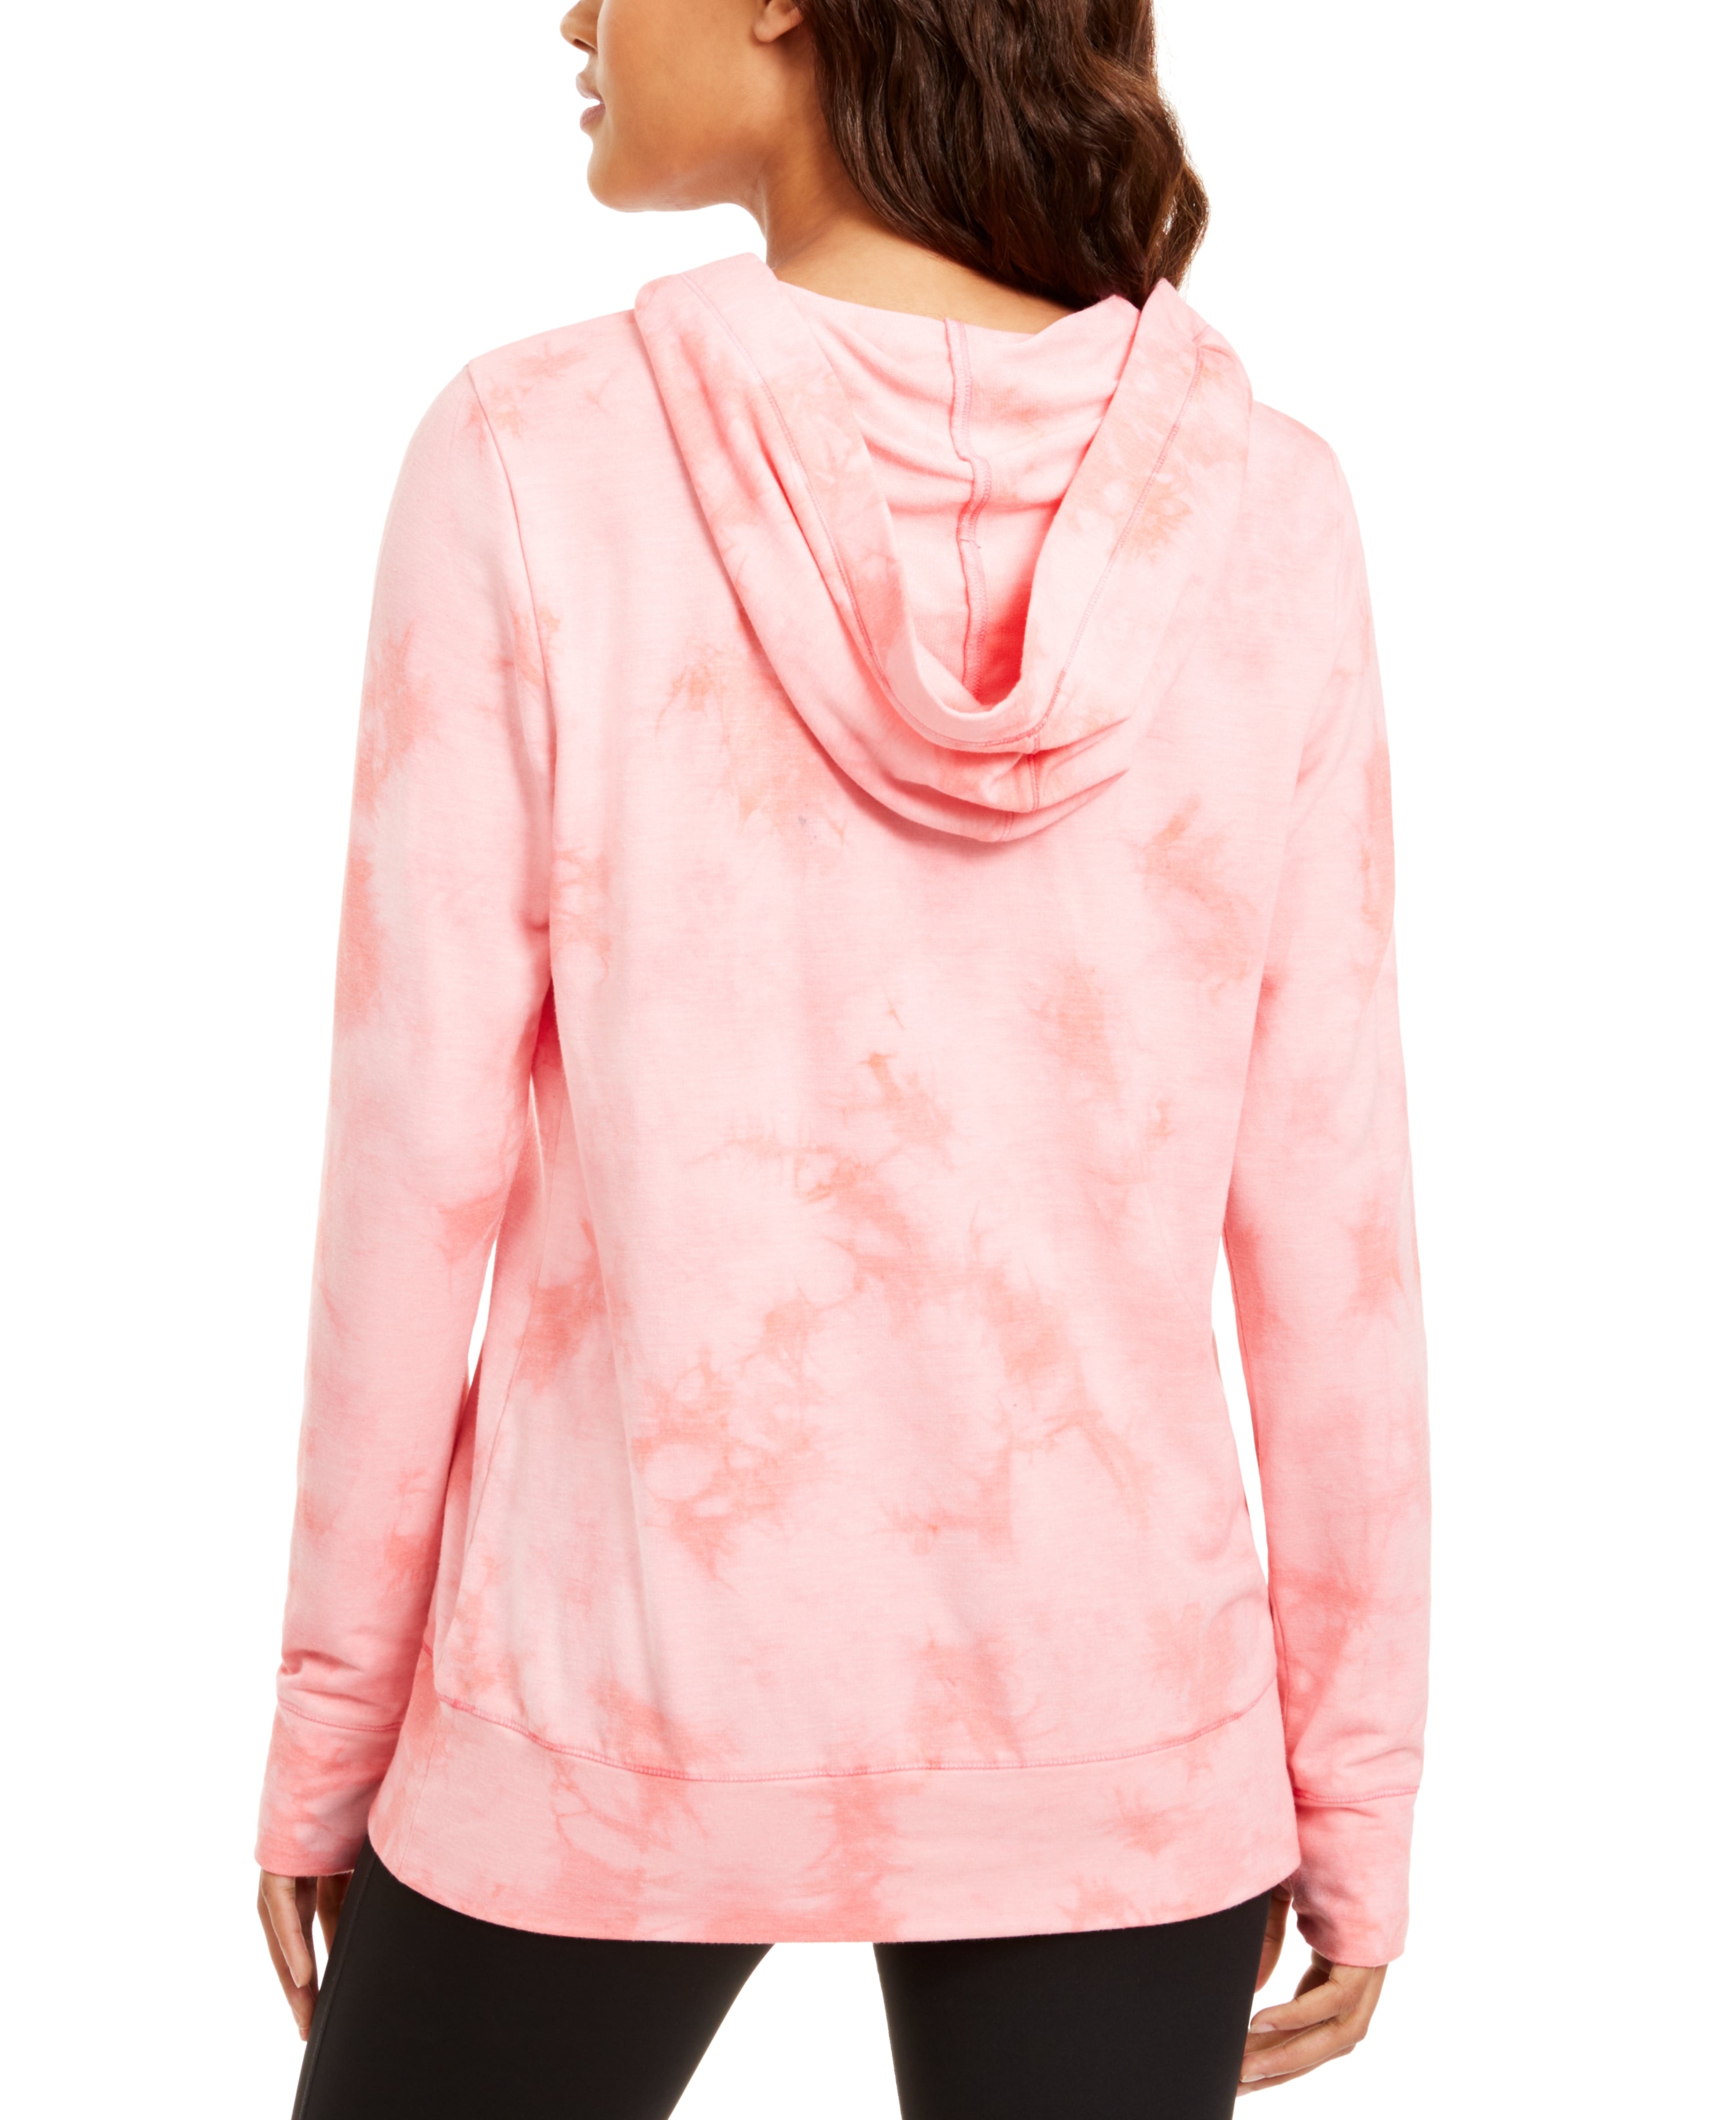 Ideology Women's Tie-Dyed Lace-Up Hoodie Spring Tulip XXL